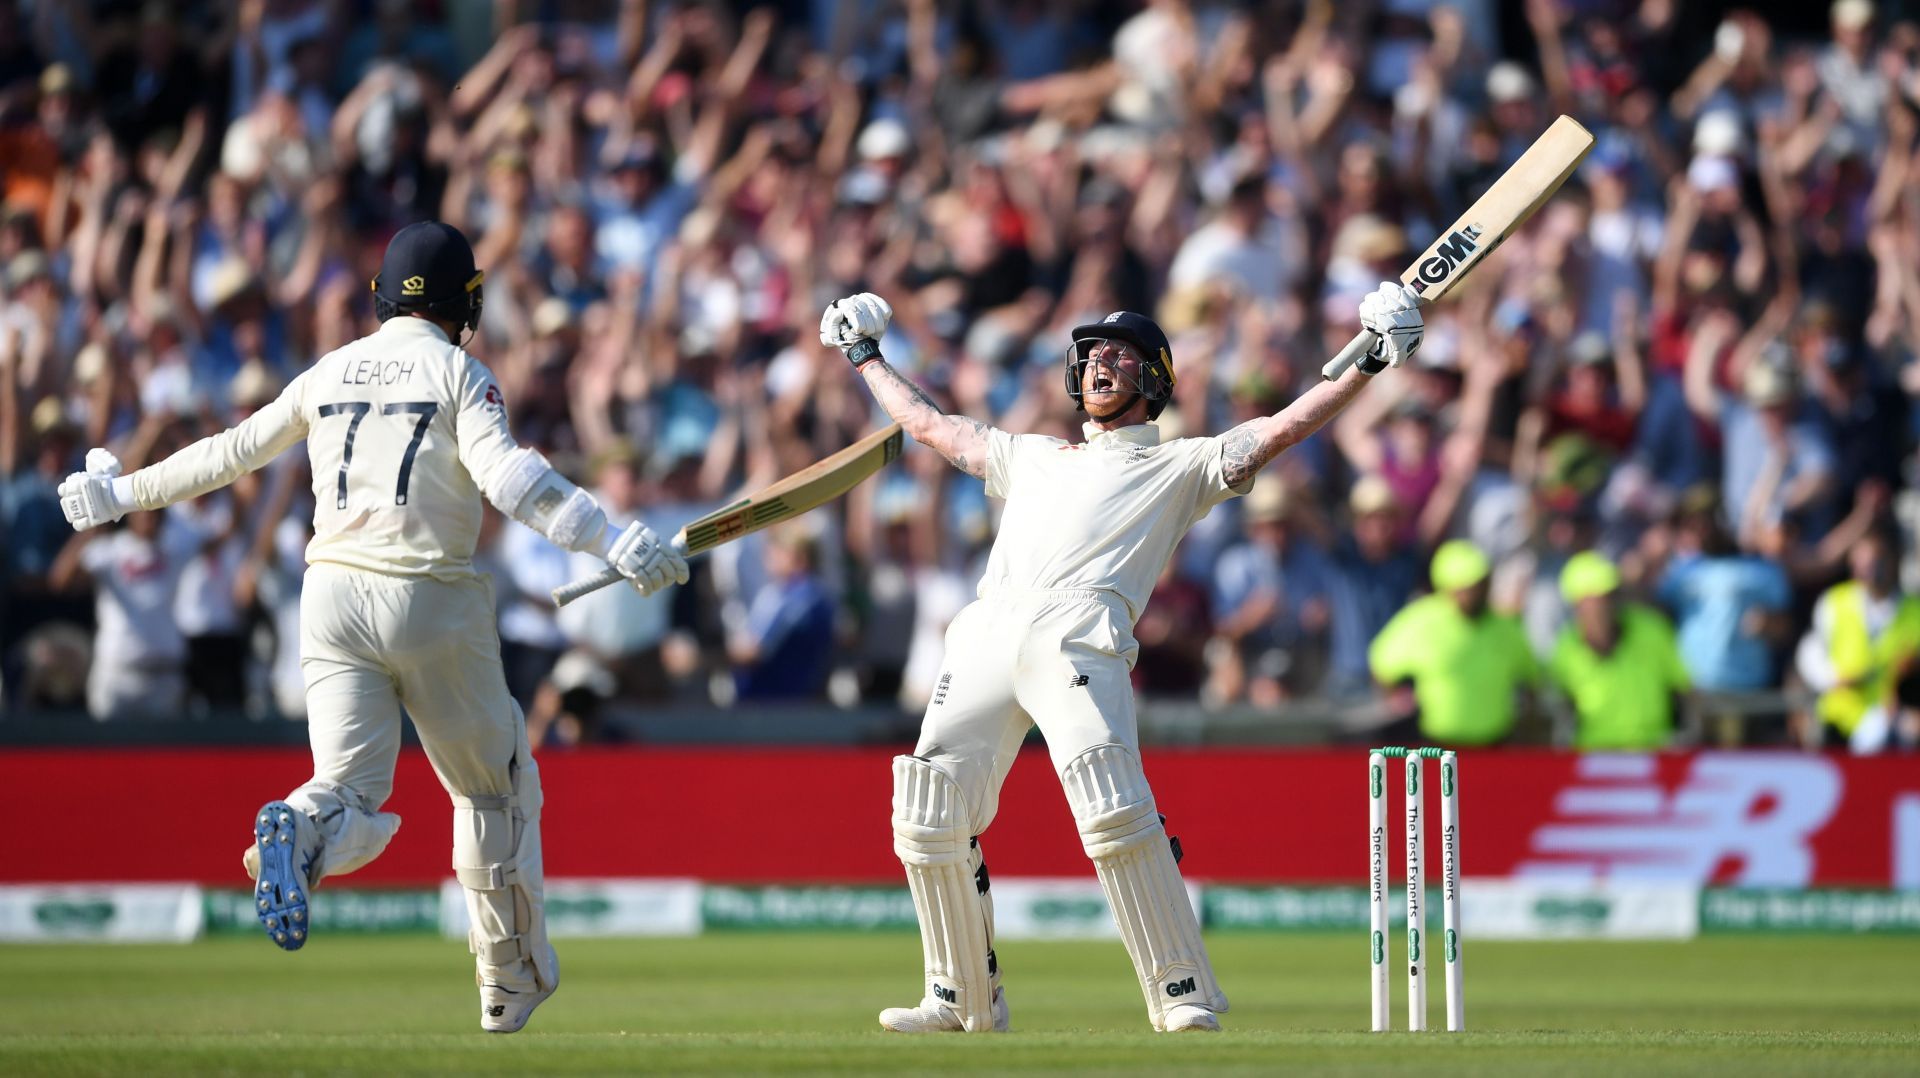 An innings for the ages - Ben Stokes erupts in joy after leading England to a thrilling one-wicket win at Headingley, Leeds against Australia in 2019.